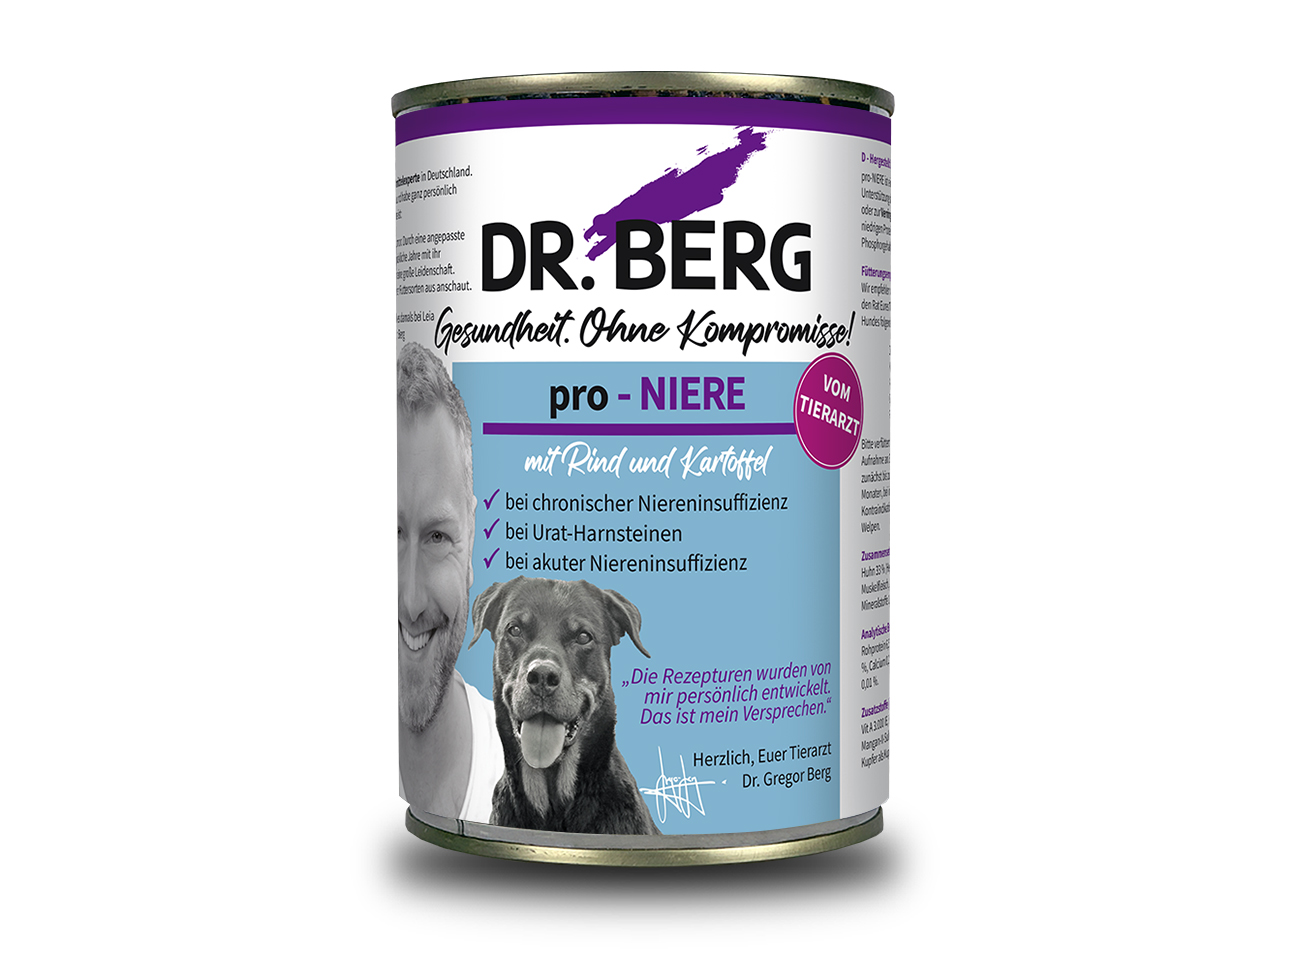 Special kidney food for dogs, emphasizes the importance of adapted Nutrition in Renal Insufficiency.